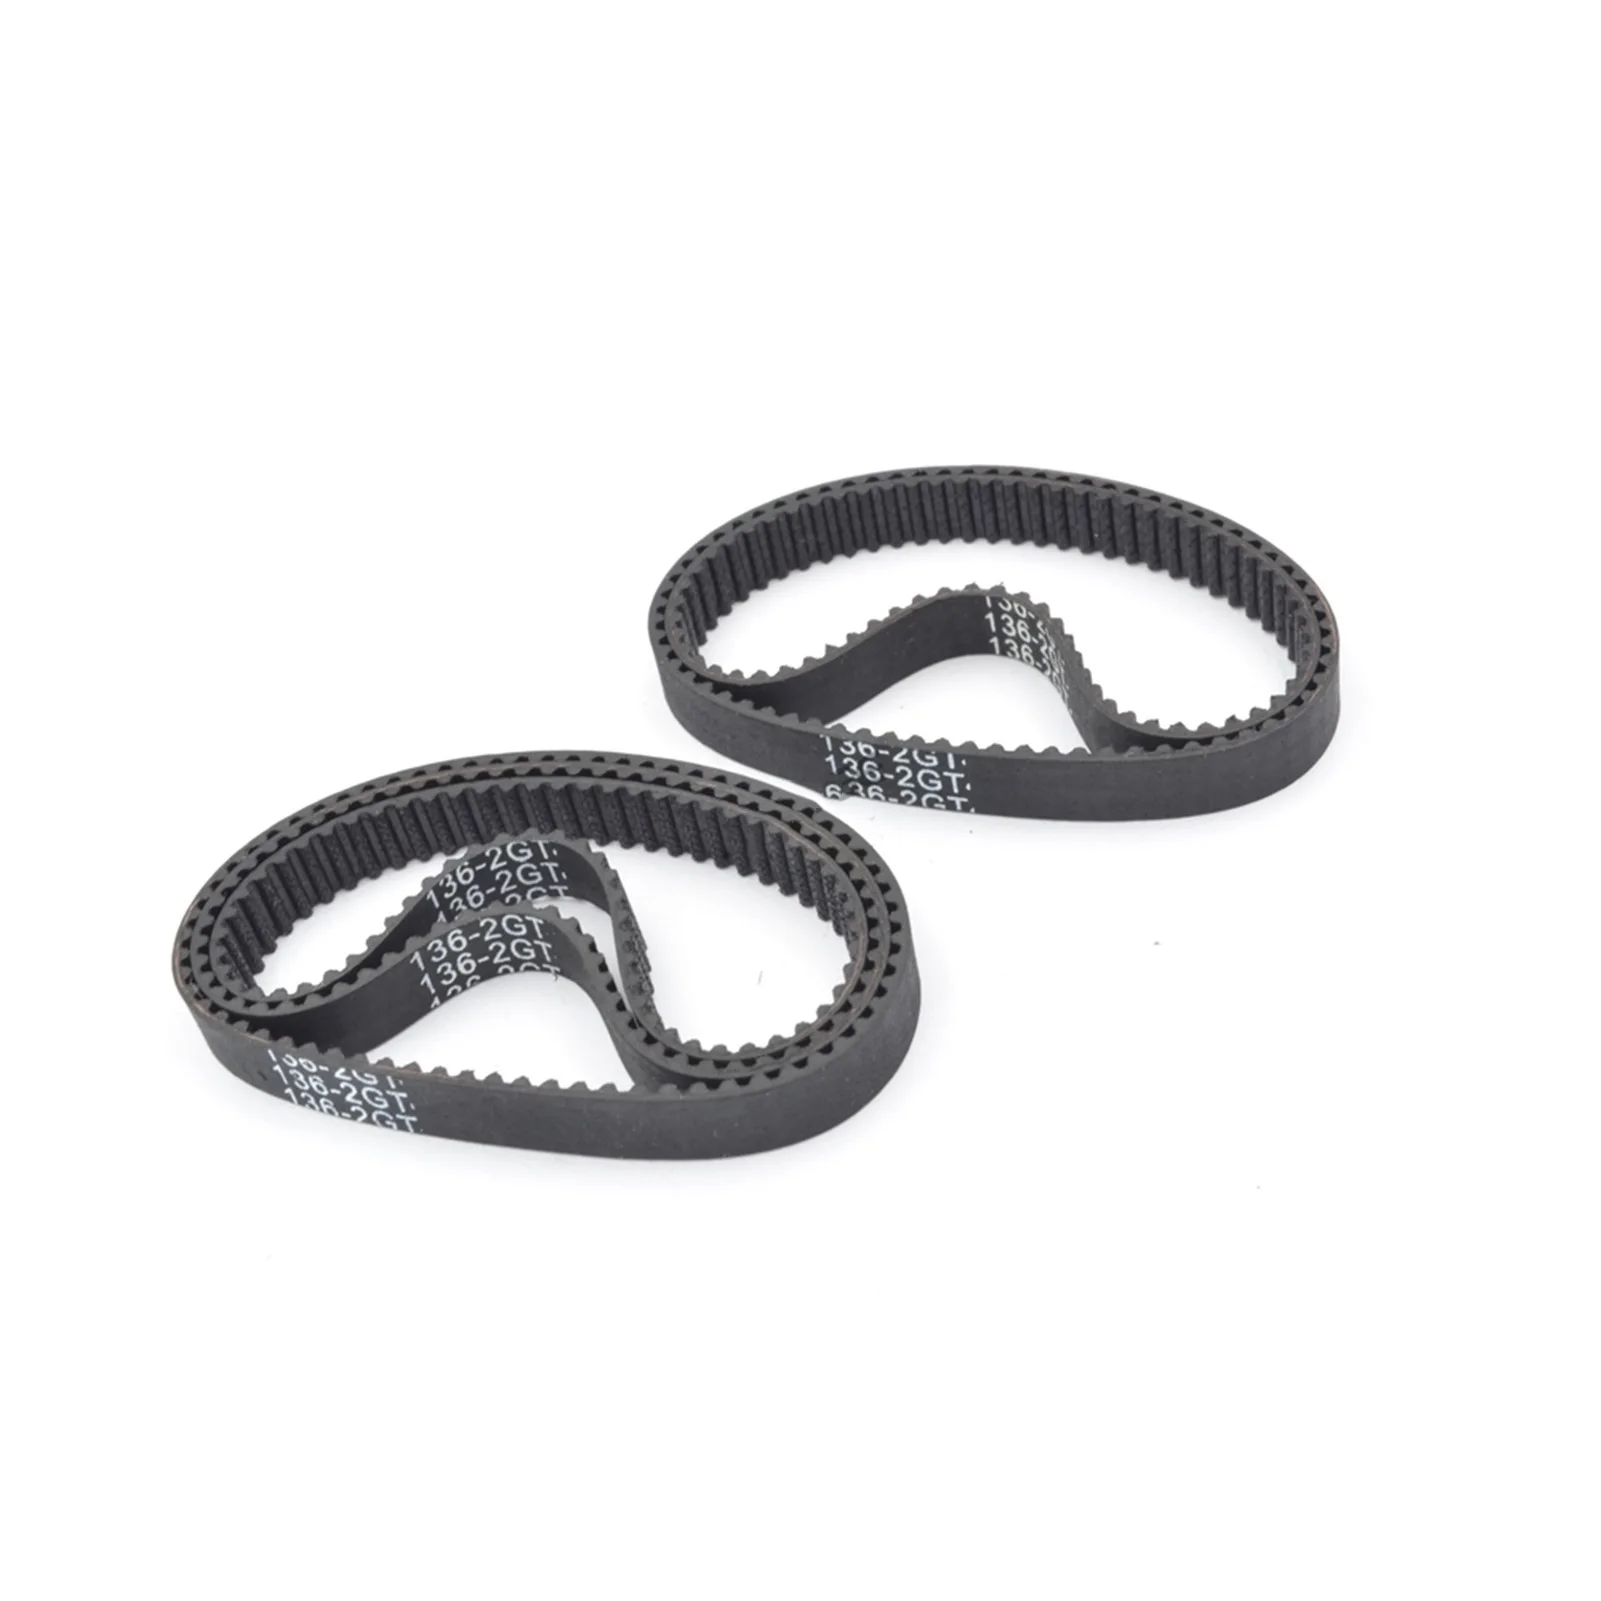 

5pcs GT3 2MGT 2M 2GT Synchronous Timing Belt, Pitch Length 136/138/140/142/144, Width 6mm/9mm, Teeth 68/69/70/72 74 in